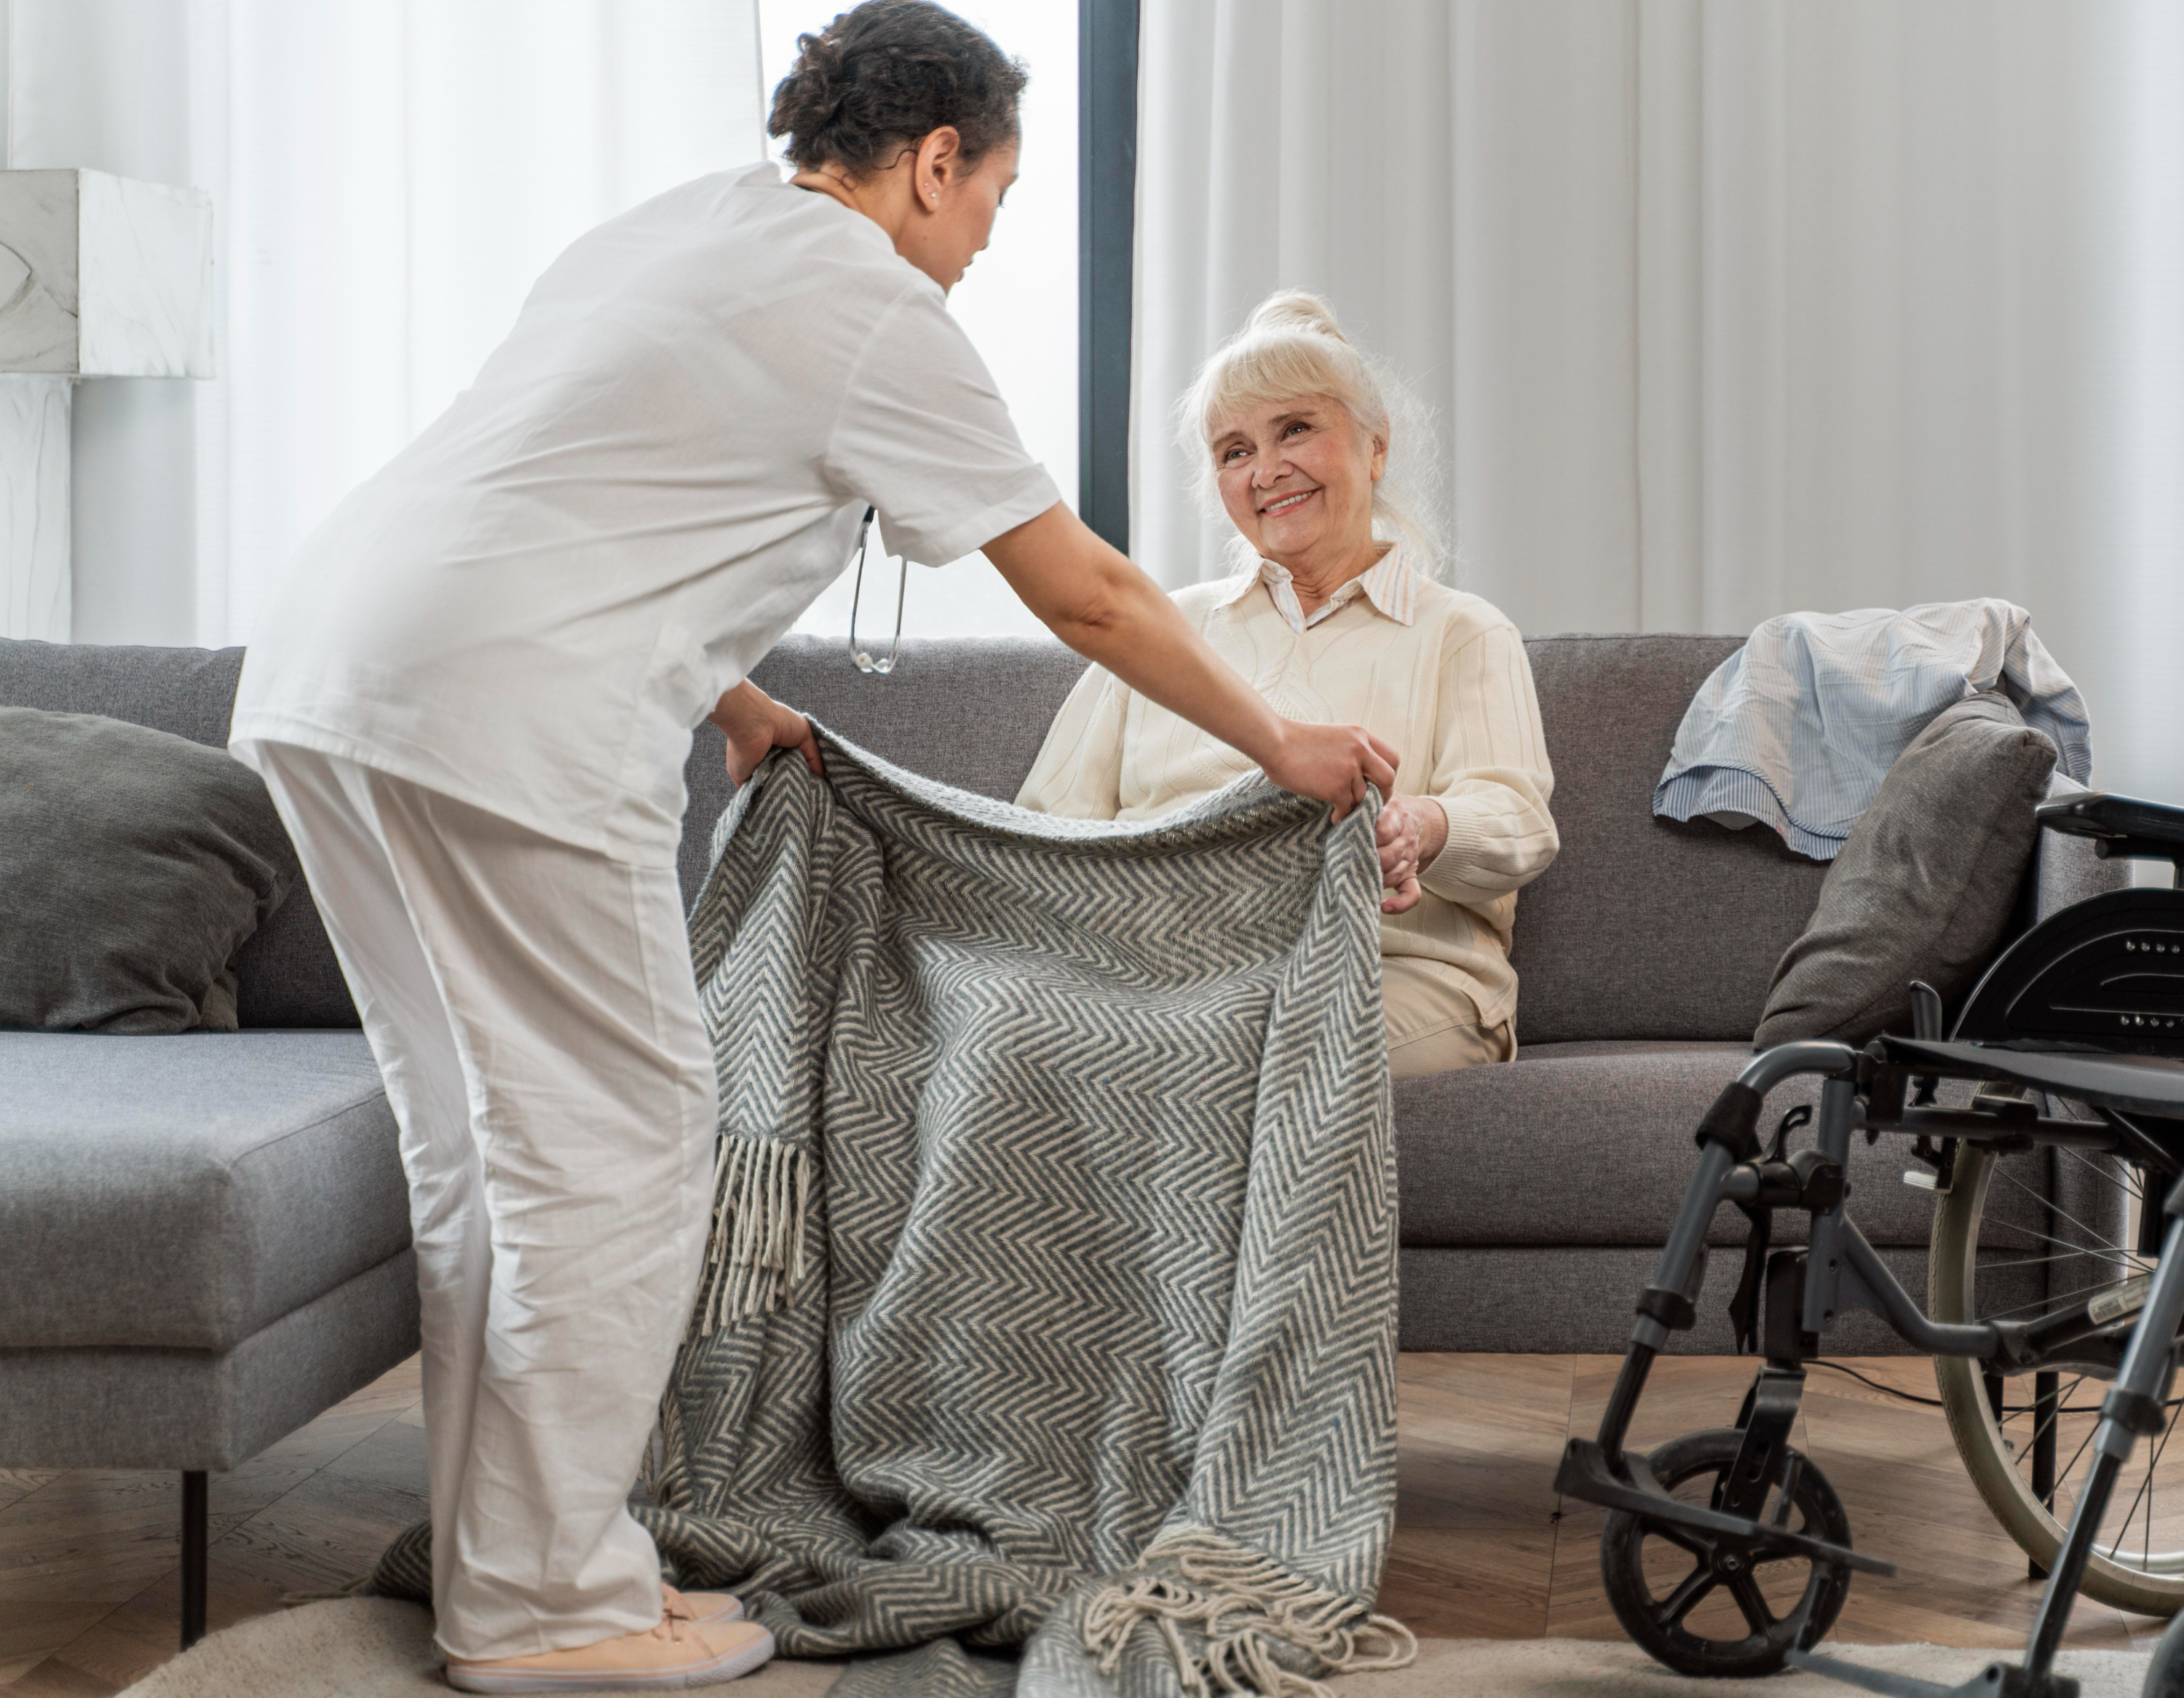 Physical, Emotional And Psychological Support - Palliative Home Care